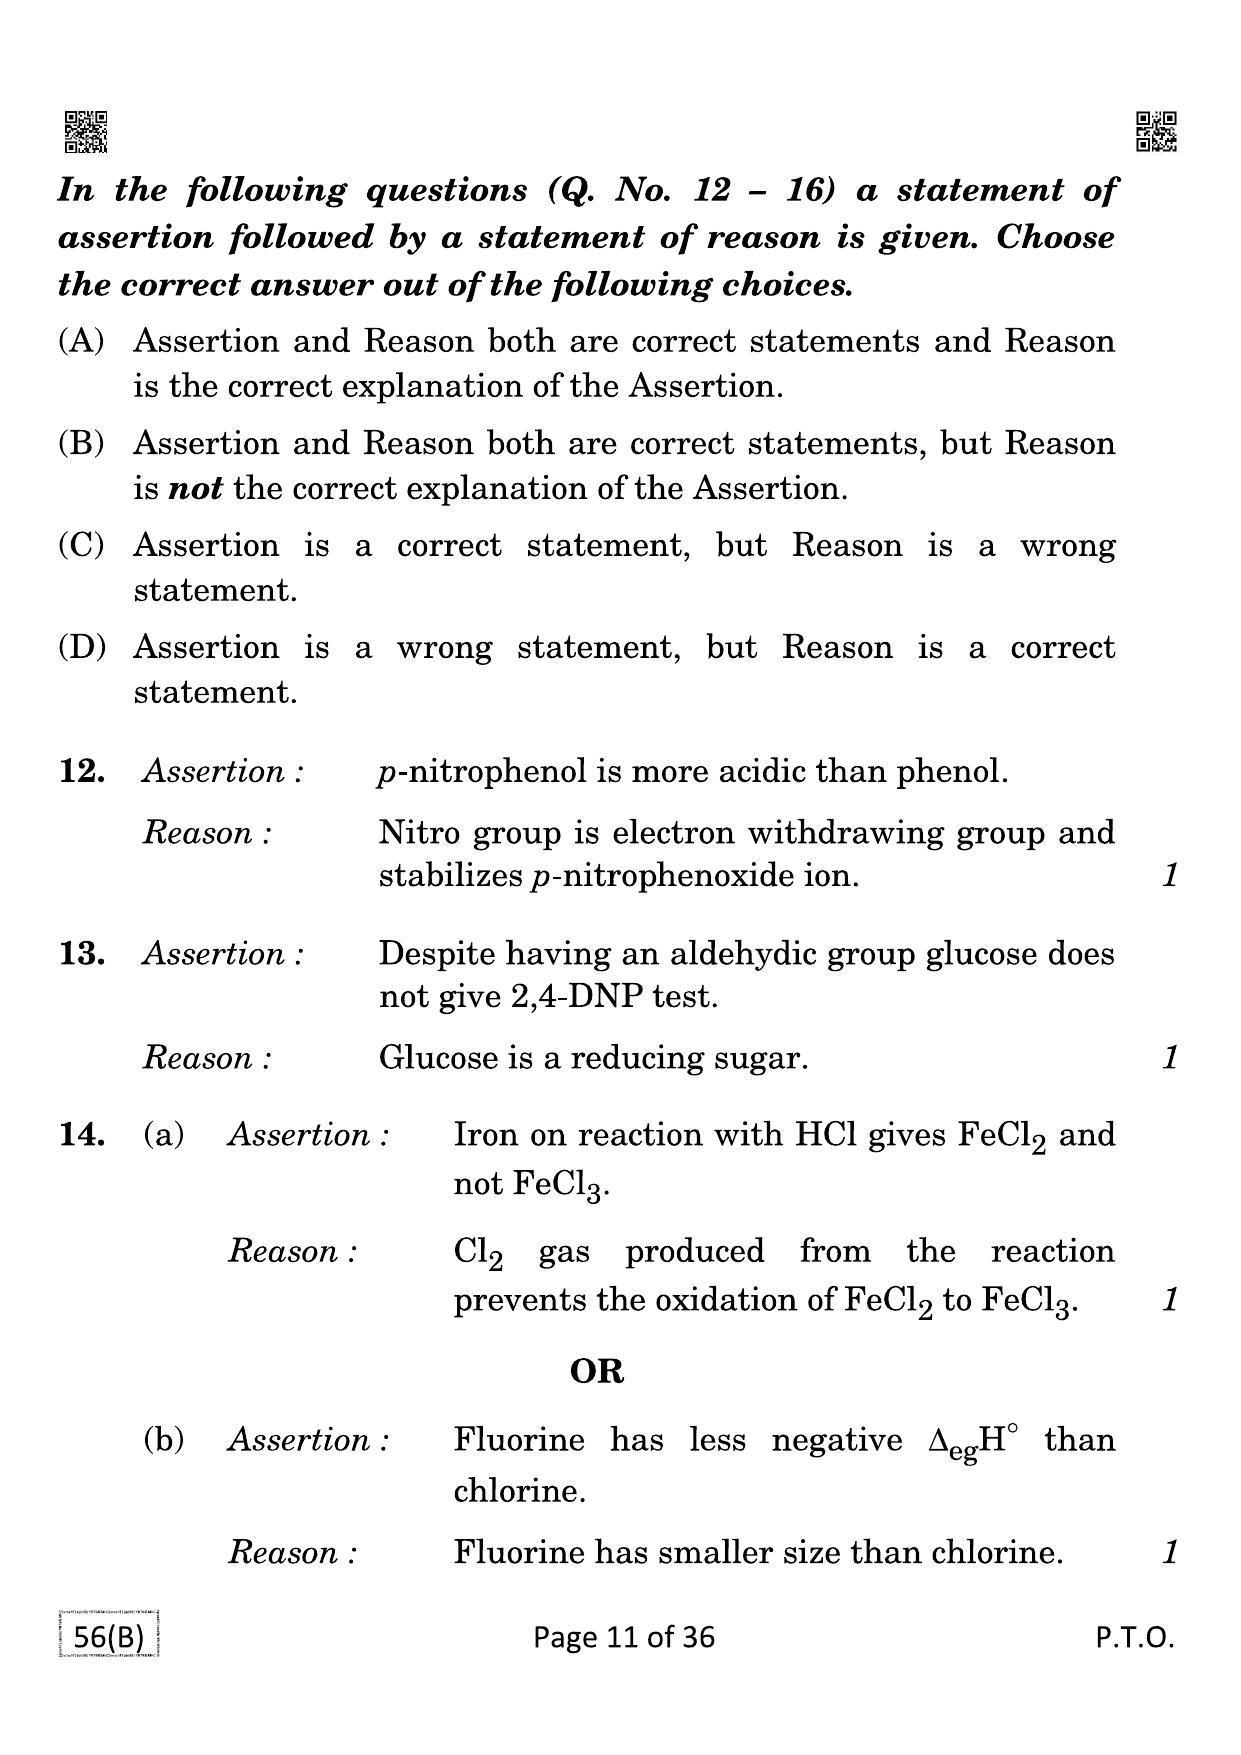 CBSE Class 12 QP_043_CHEMISTRY_FOR_BLIND_CANDIDATES 2021 Compartment Question Paper - Page 11